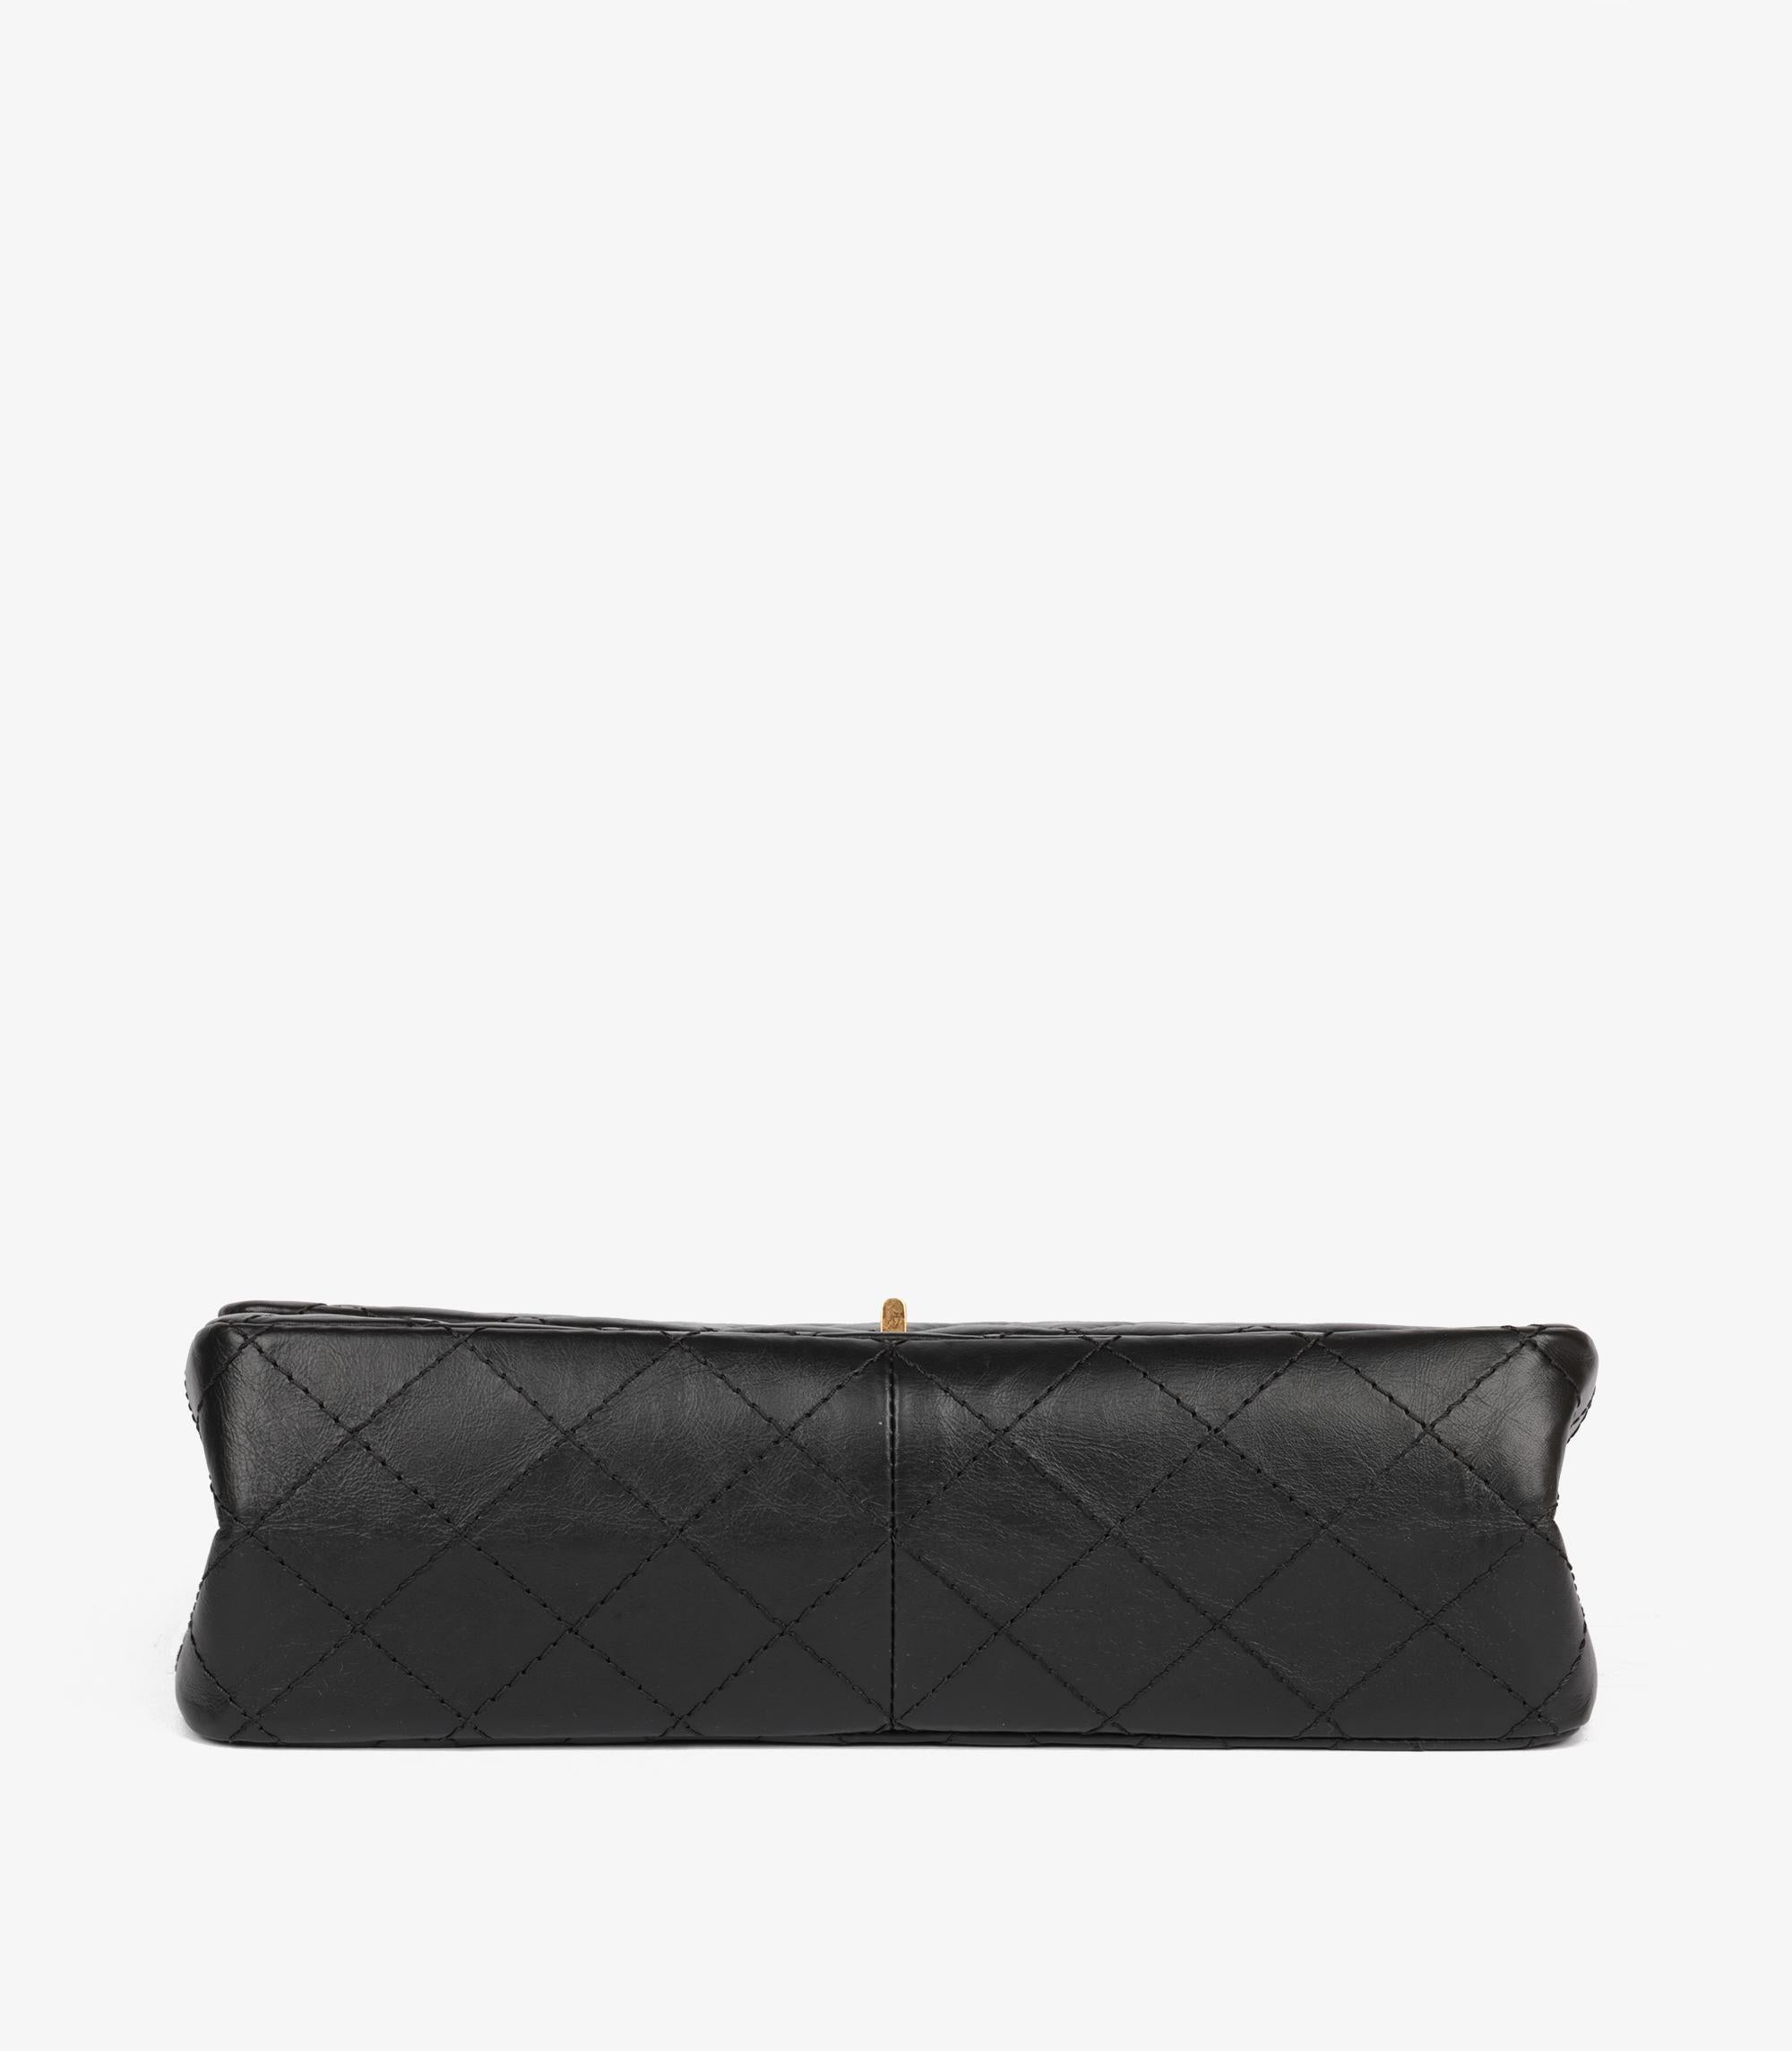 Chanel Black Quilted Crinkled Calfskin Leather 226 2.55 Reissue Double Flap Bag For Sale 5